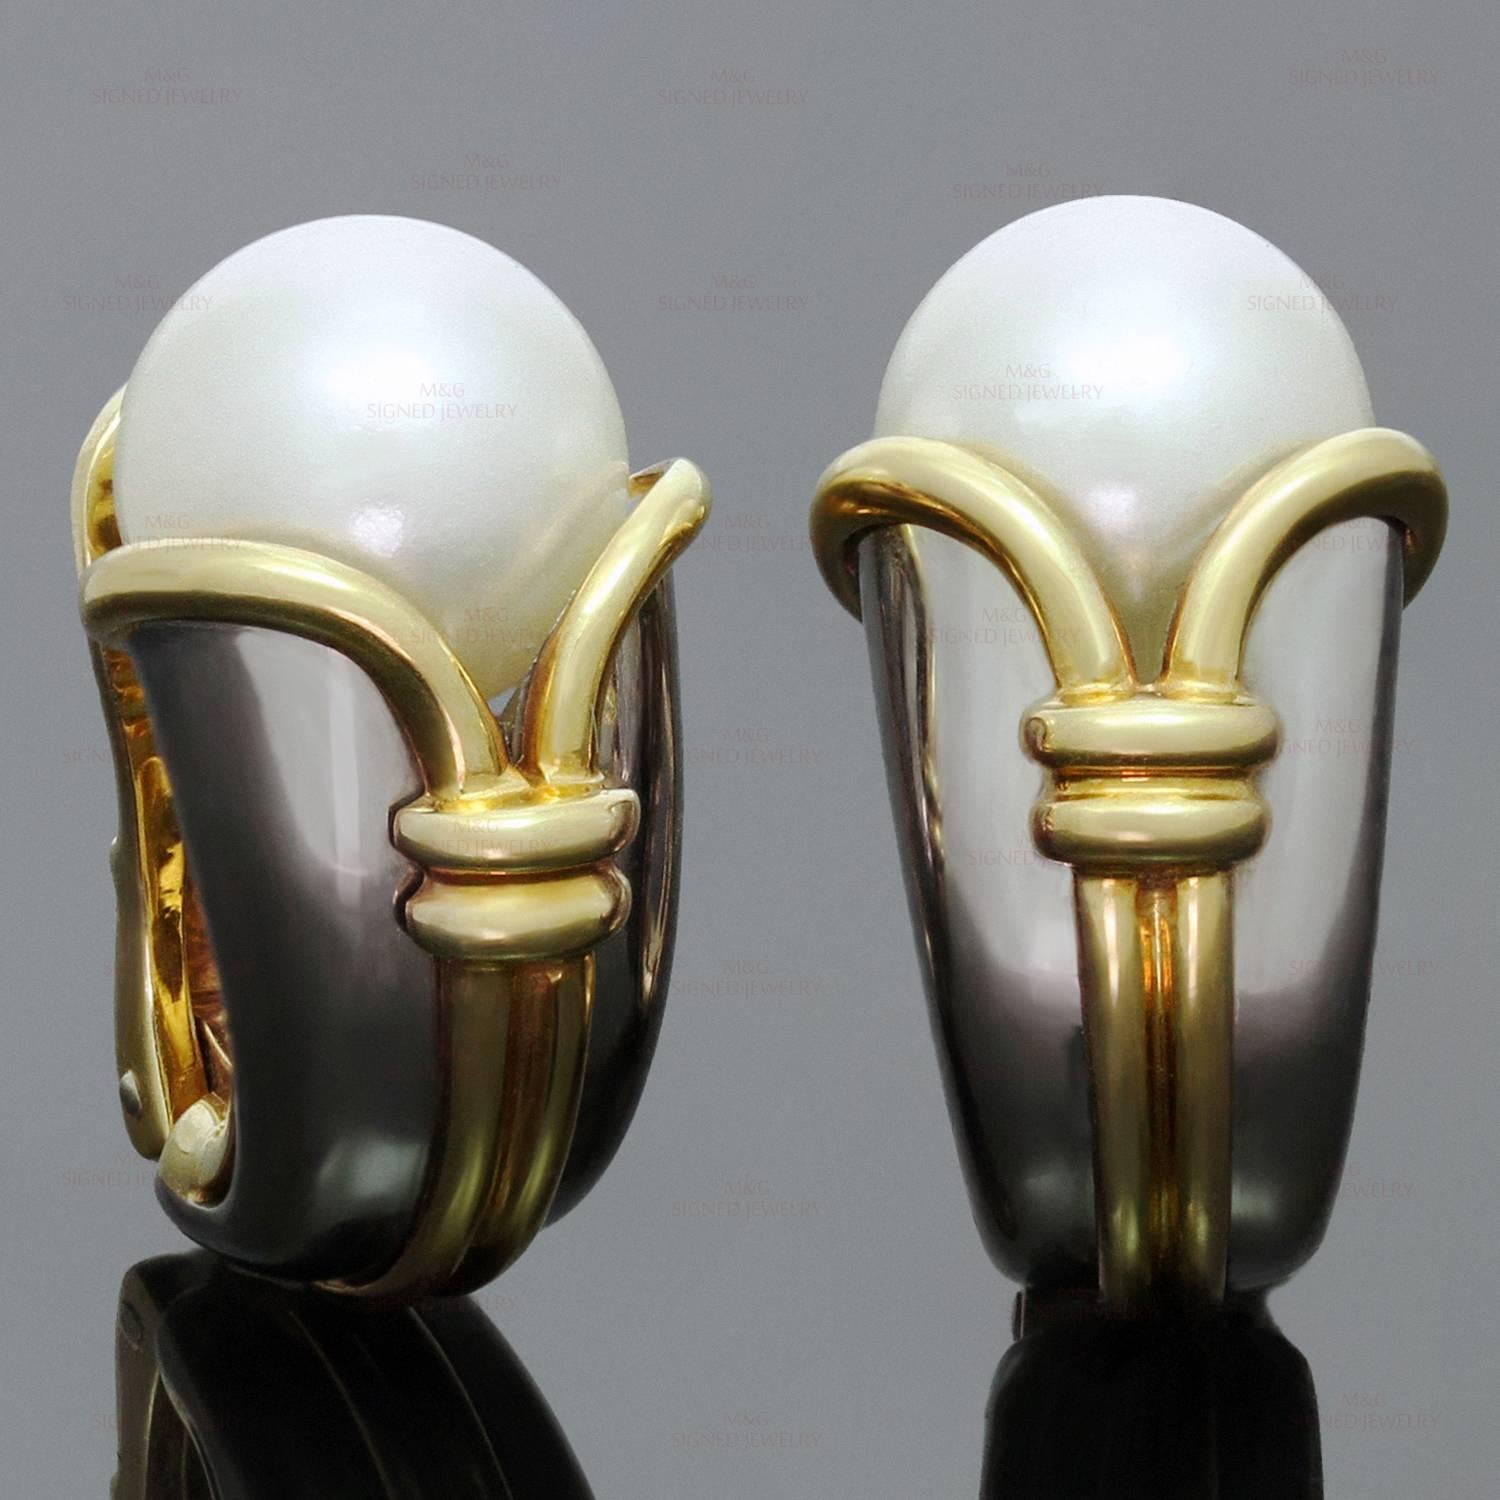 These elegant clip-on earrings from Bulgari's festive Cornucopia collection are crafted in 18k white & yellow gold and set with a pair of 10.0mm cultured pearls. Made in Italy circa 1990s. Measurements: 0.47" (12mm) width, 0.86" (22mm)